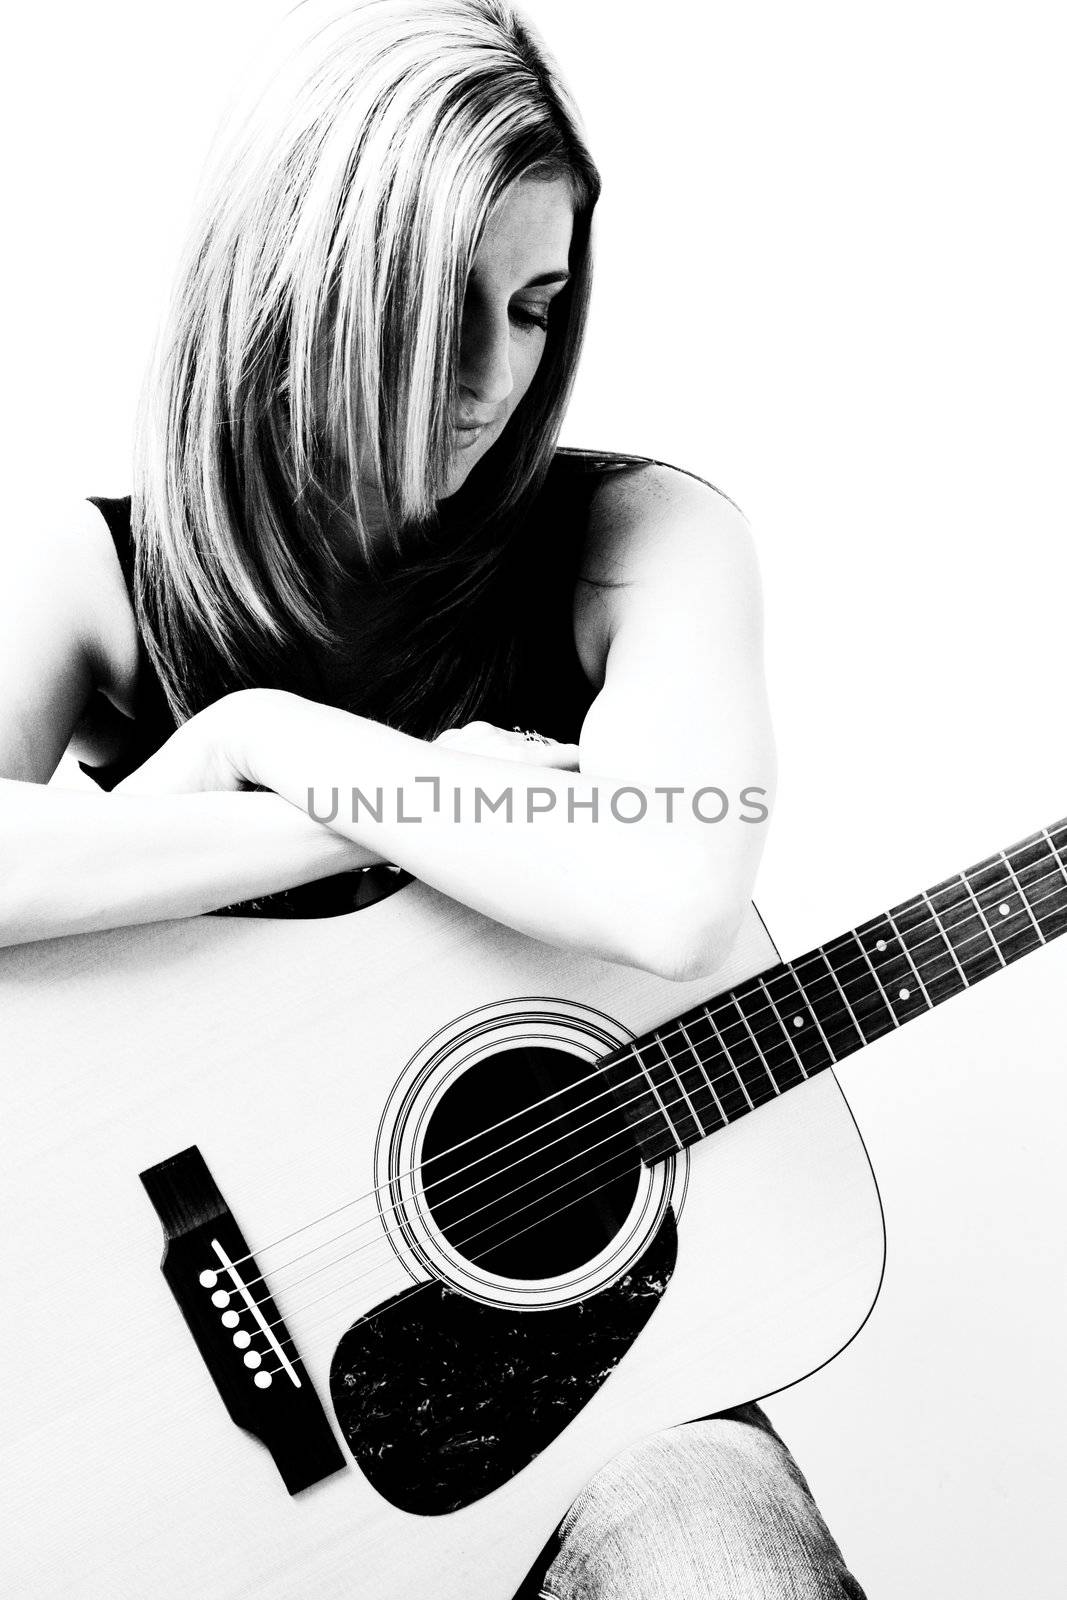 Thirty something women sitting on stule leaning on accoustic guitar looking down